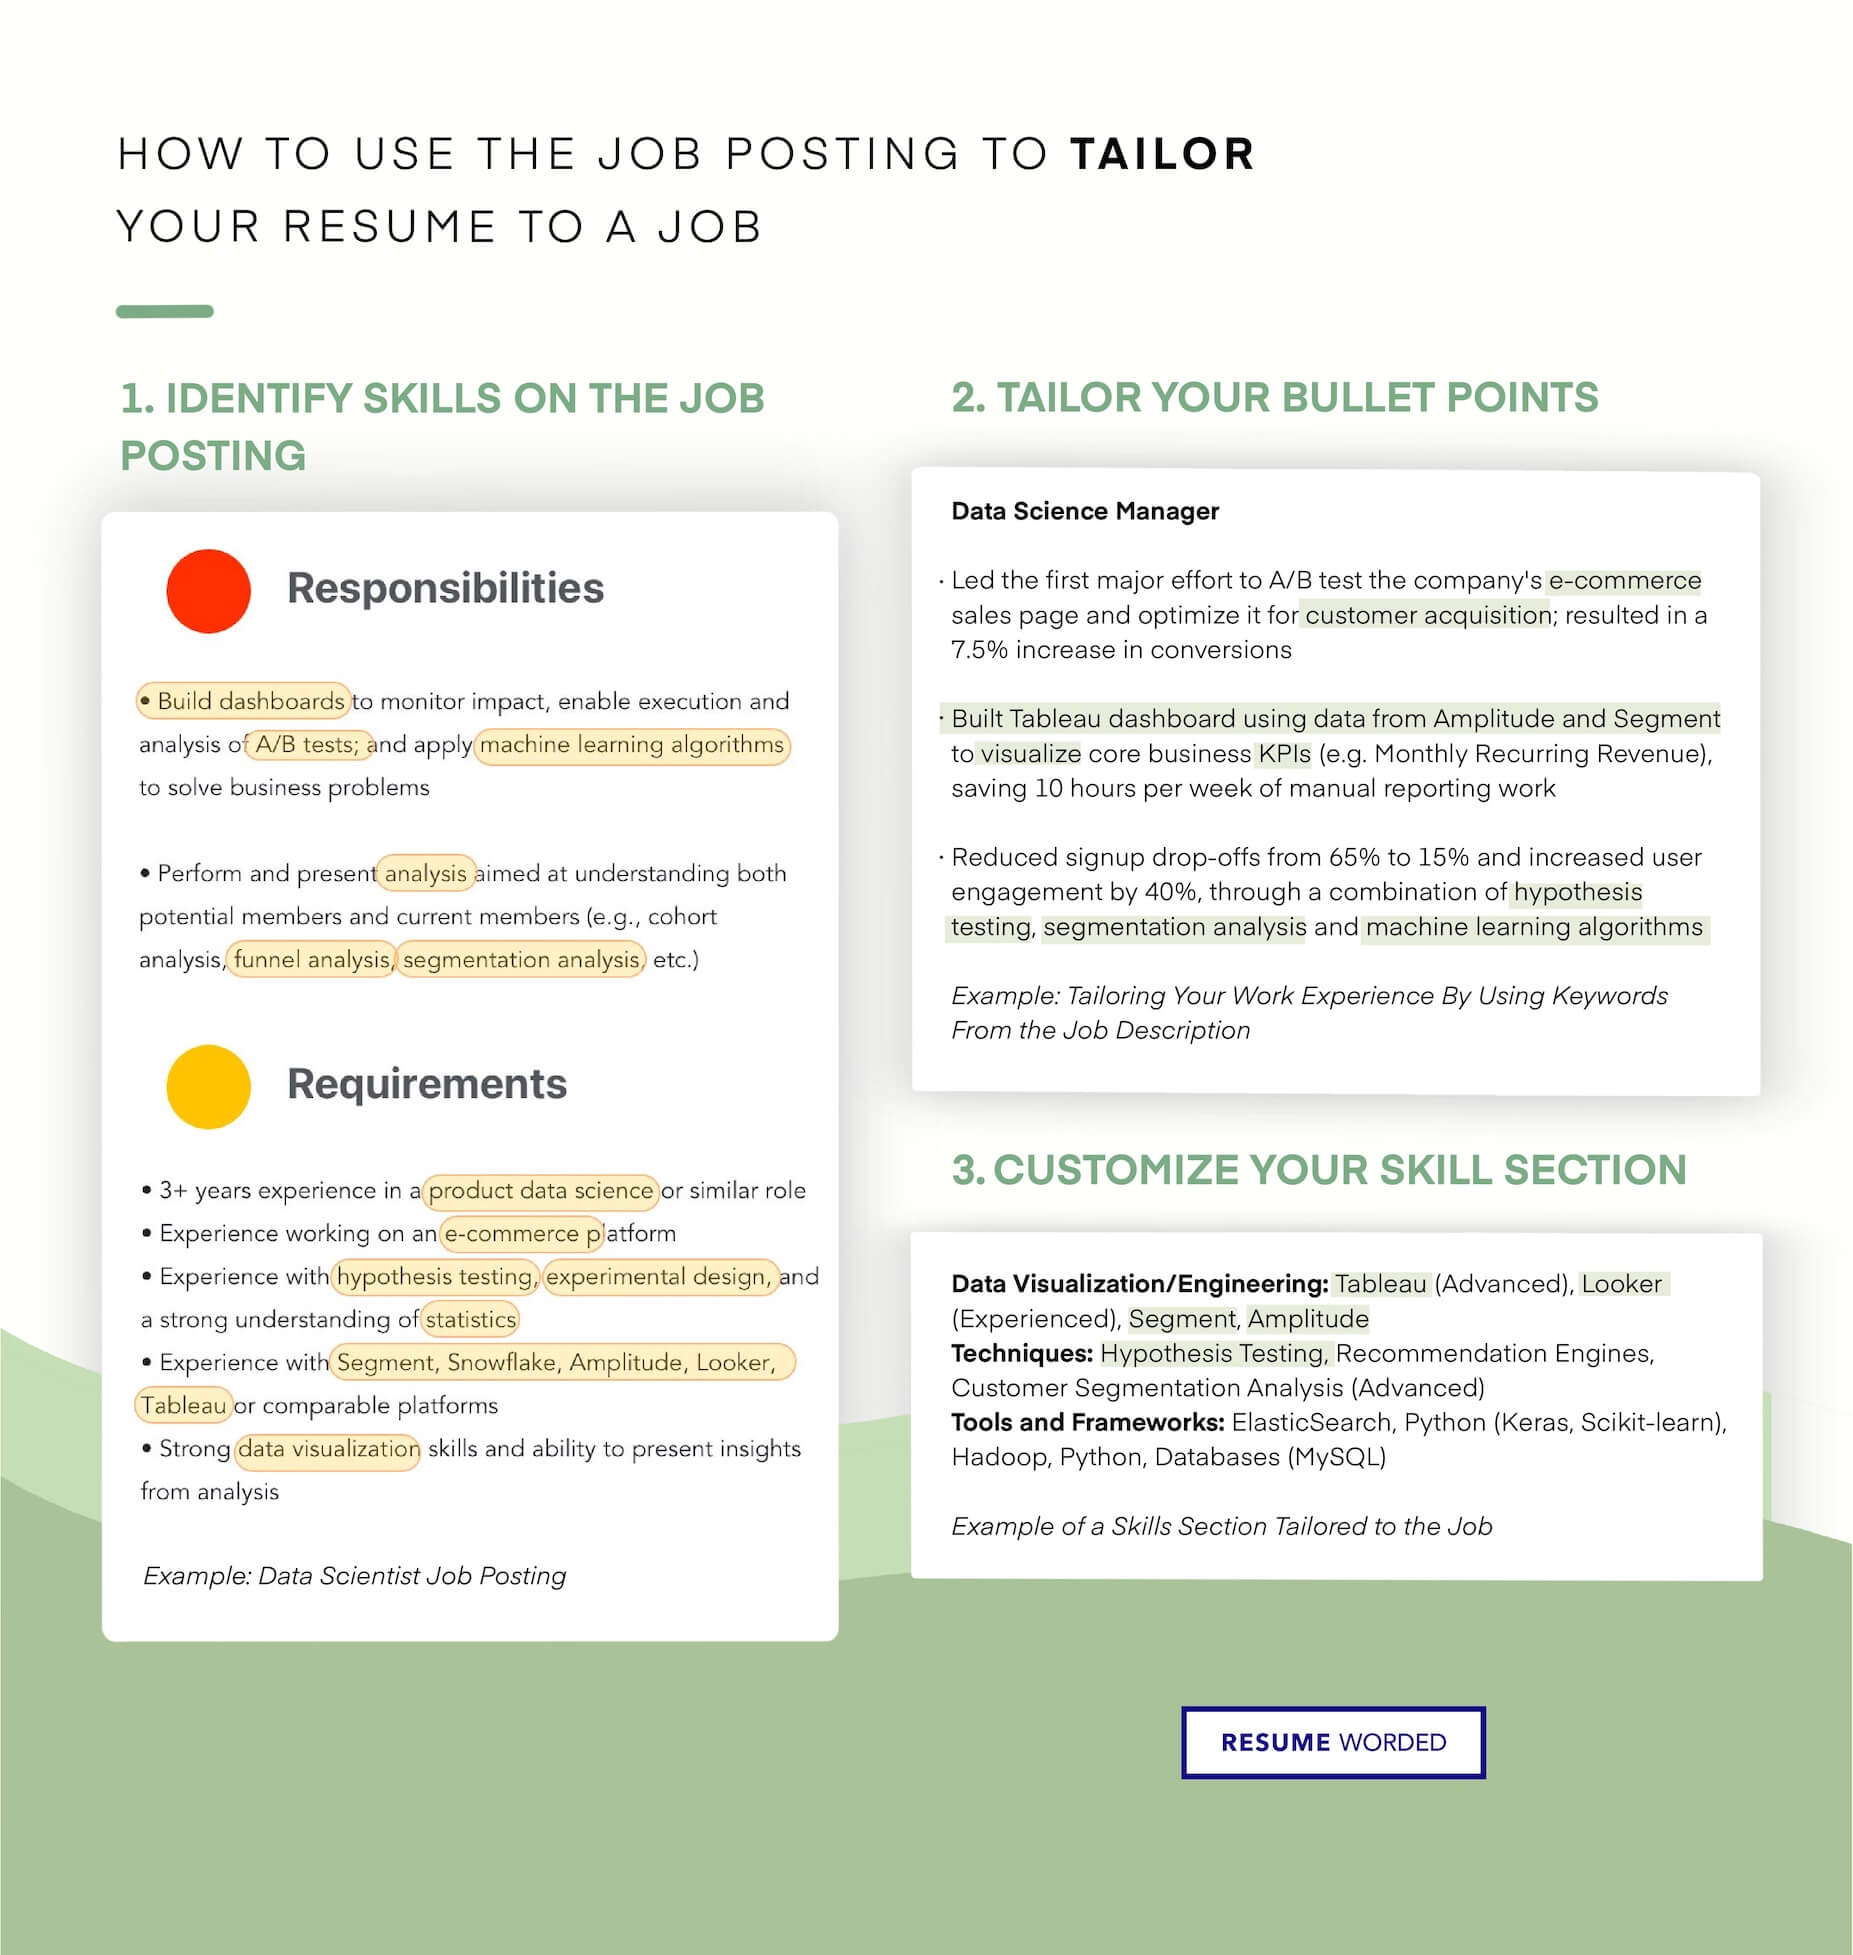 Tailor your resume for each role - Big Data Engineer Resume